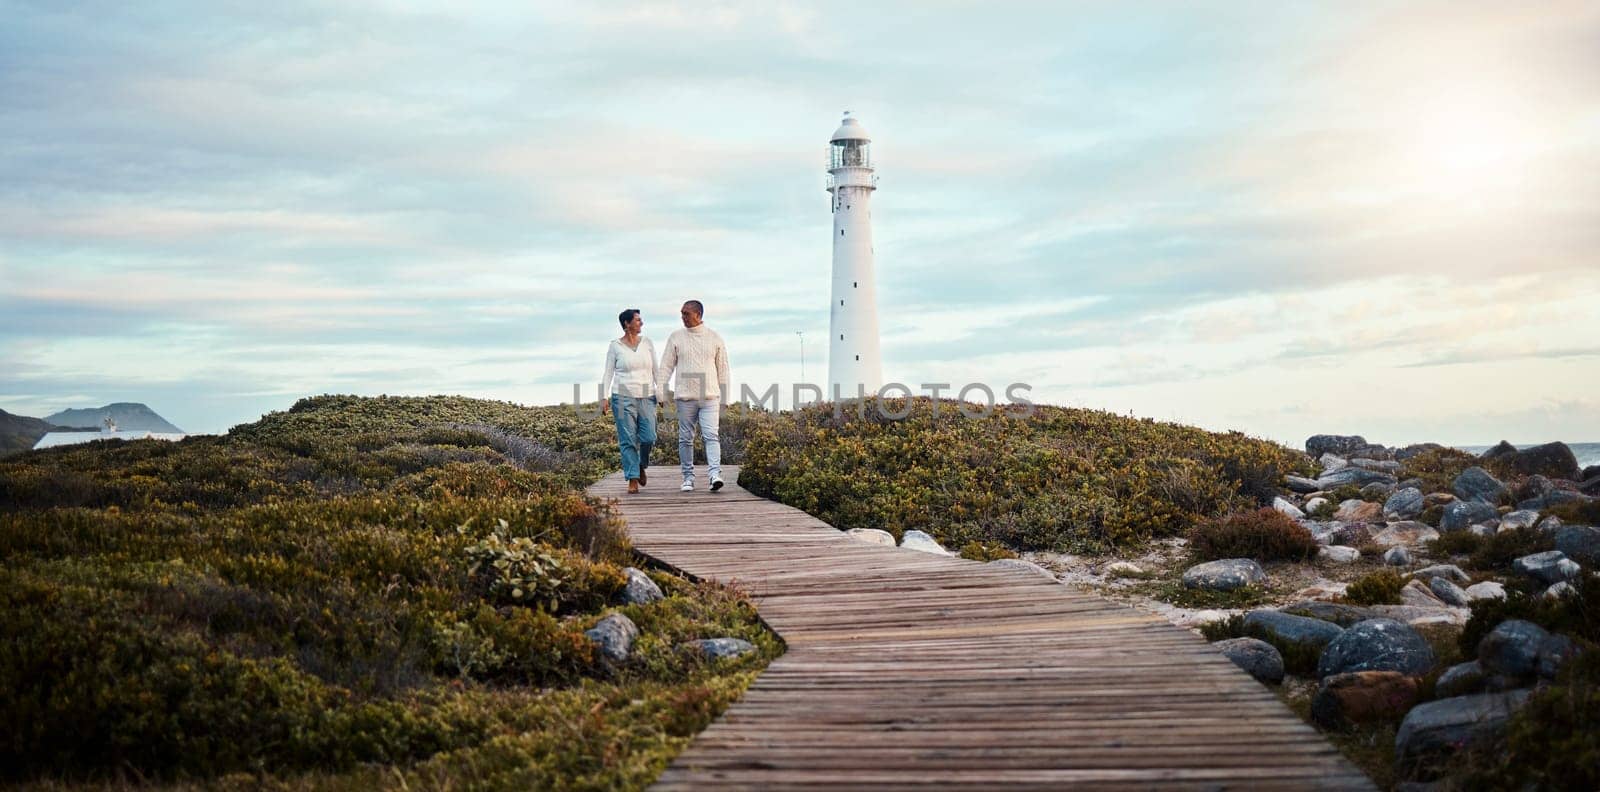 Romance, love and a couple holding hands while walking on the beach with a lighthouse in the background. Nature, view or blue sky mockup with a man and woman taking a romantic walk outside together.